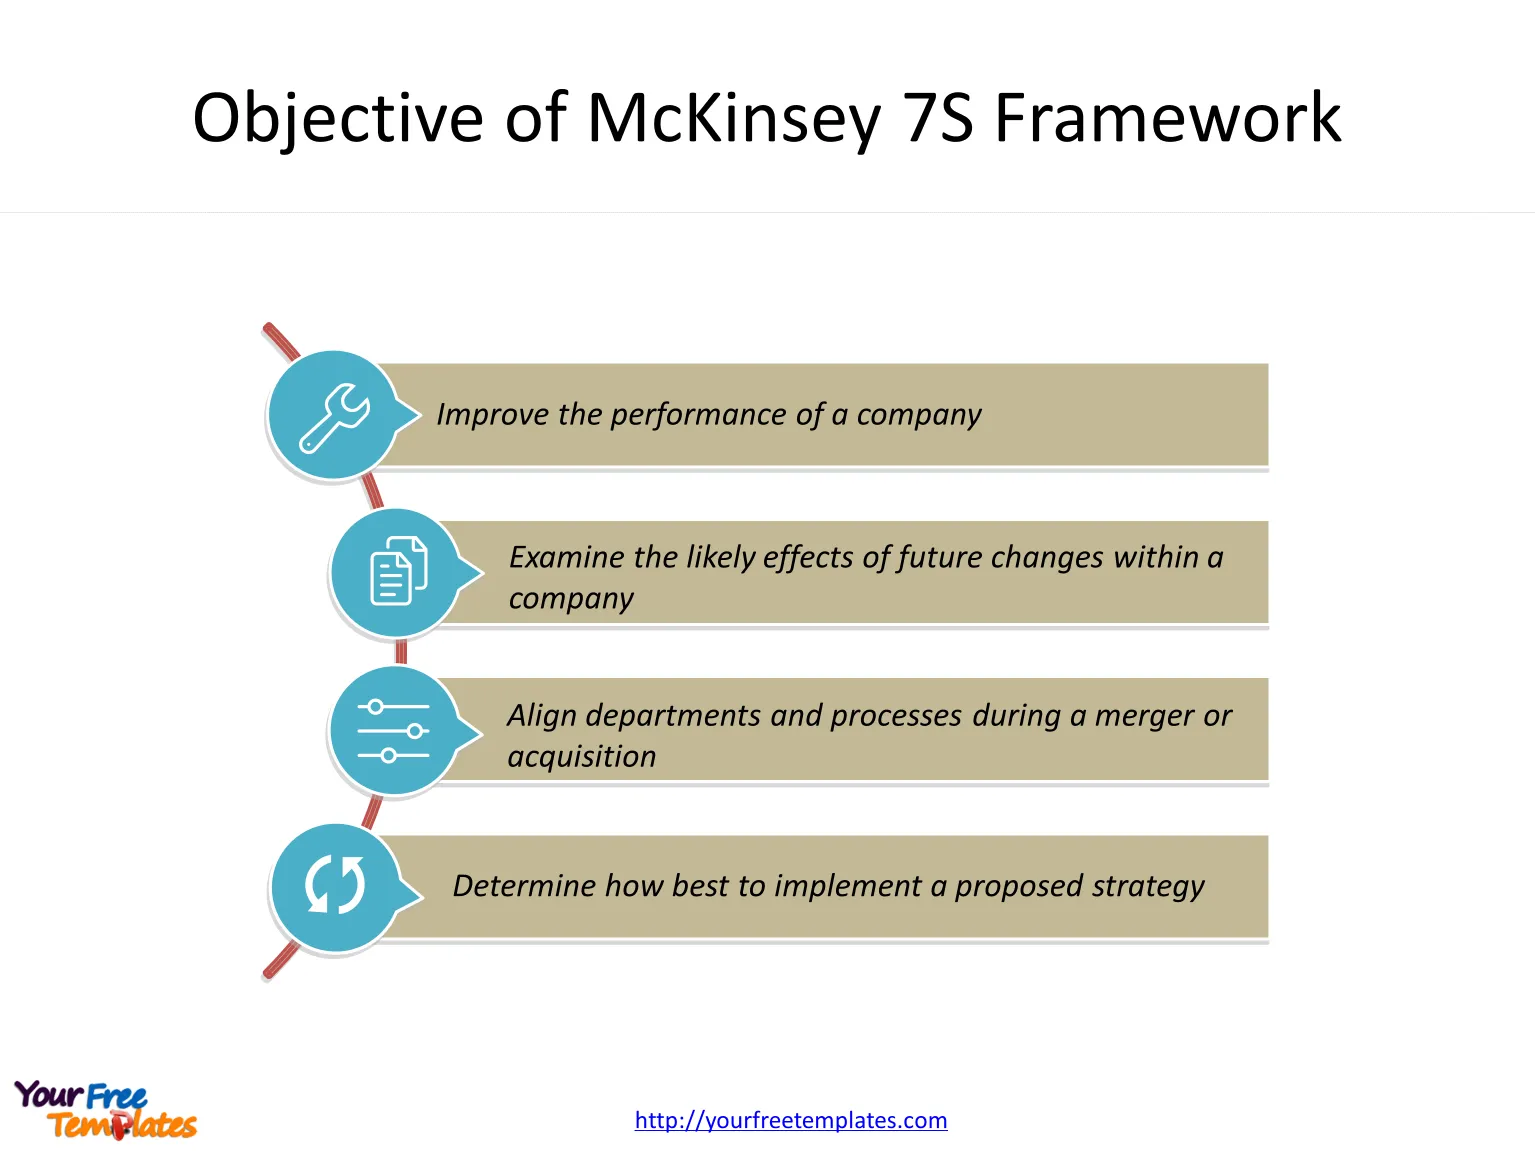 McKinsey 7S Framework of structure, strategy, systems, skills, style, staff and shared values